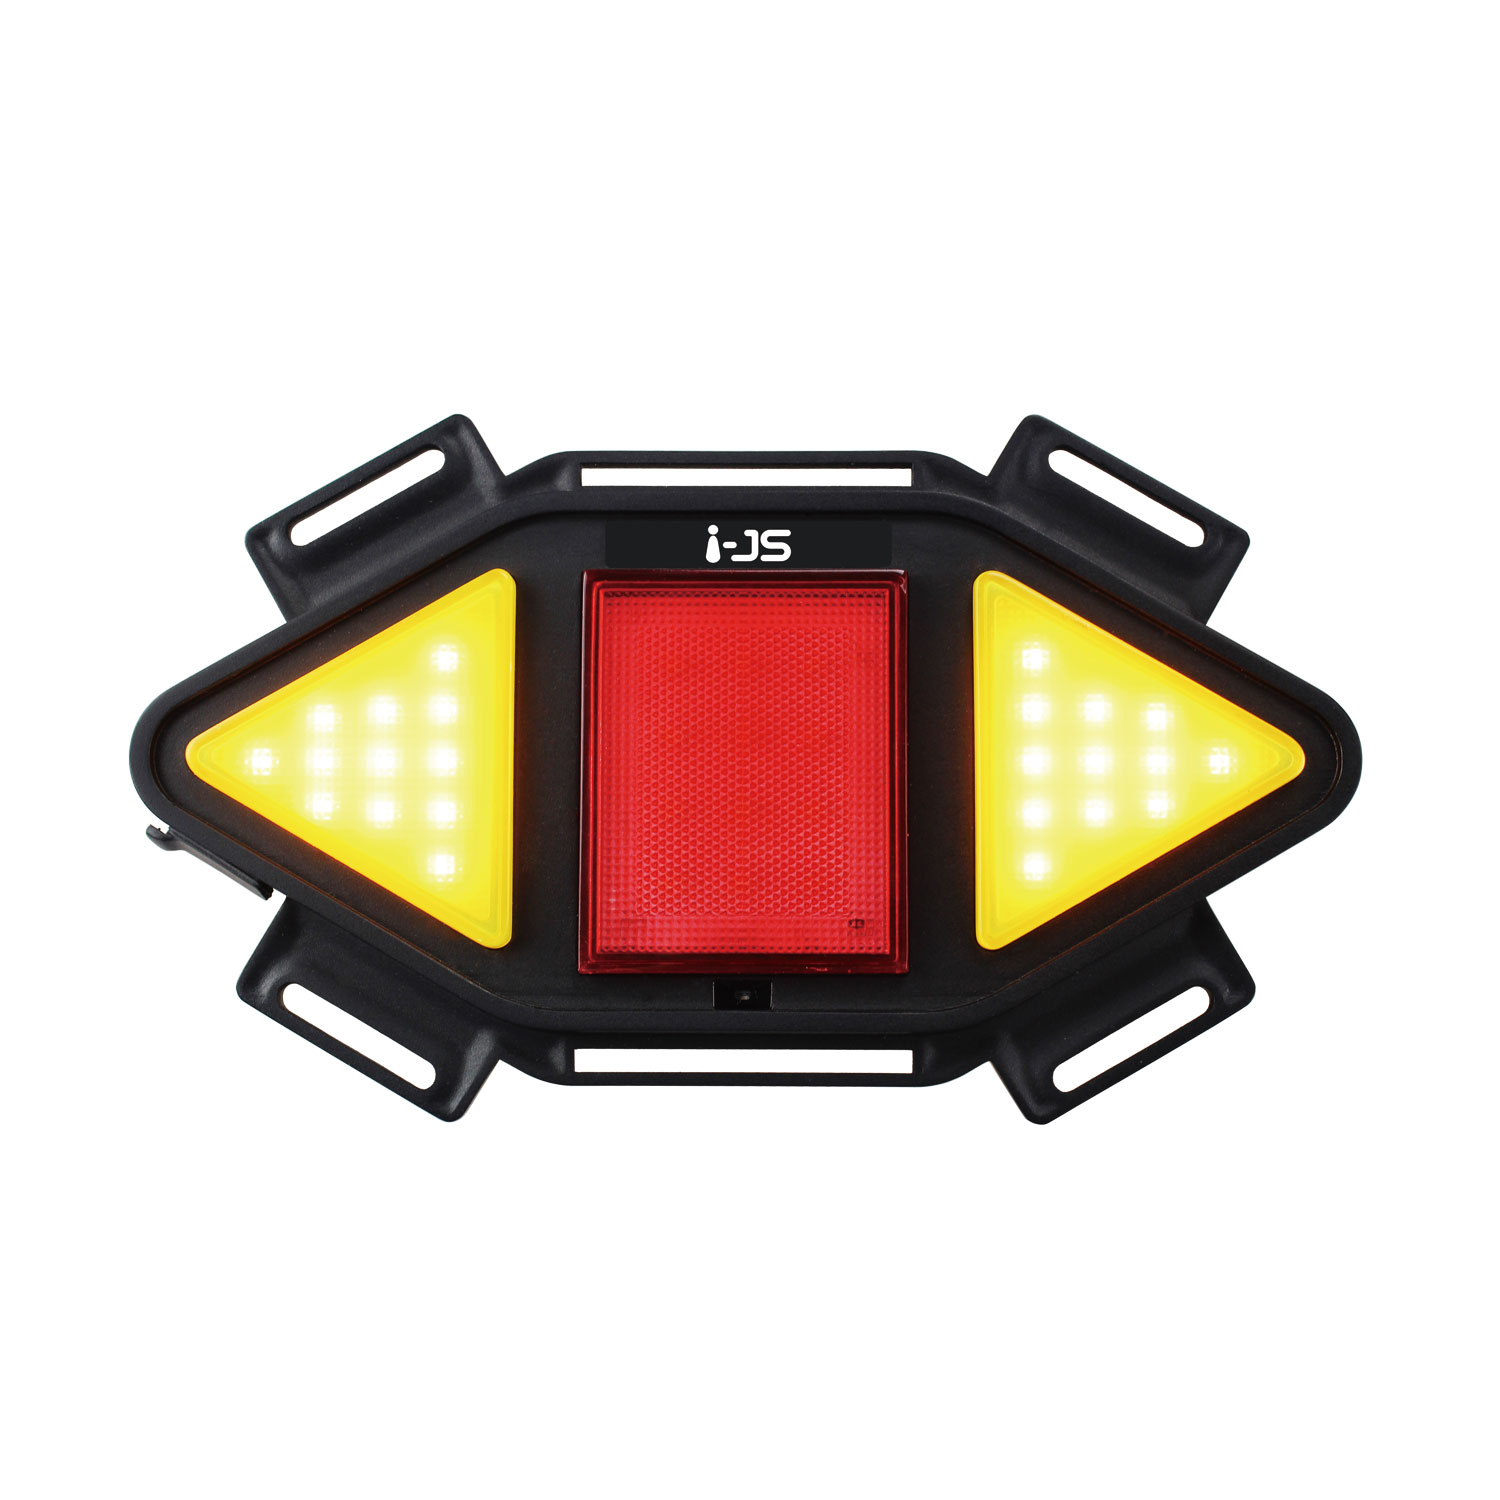 Motorcycle and bicycle scooter lights and turn signals or safety lights